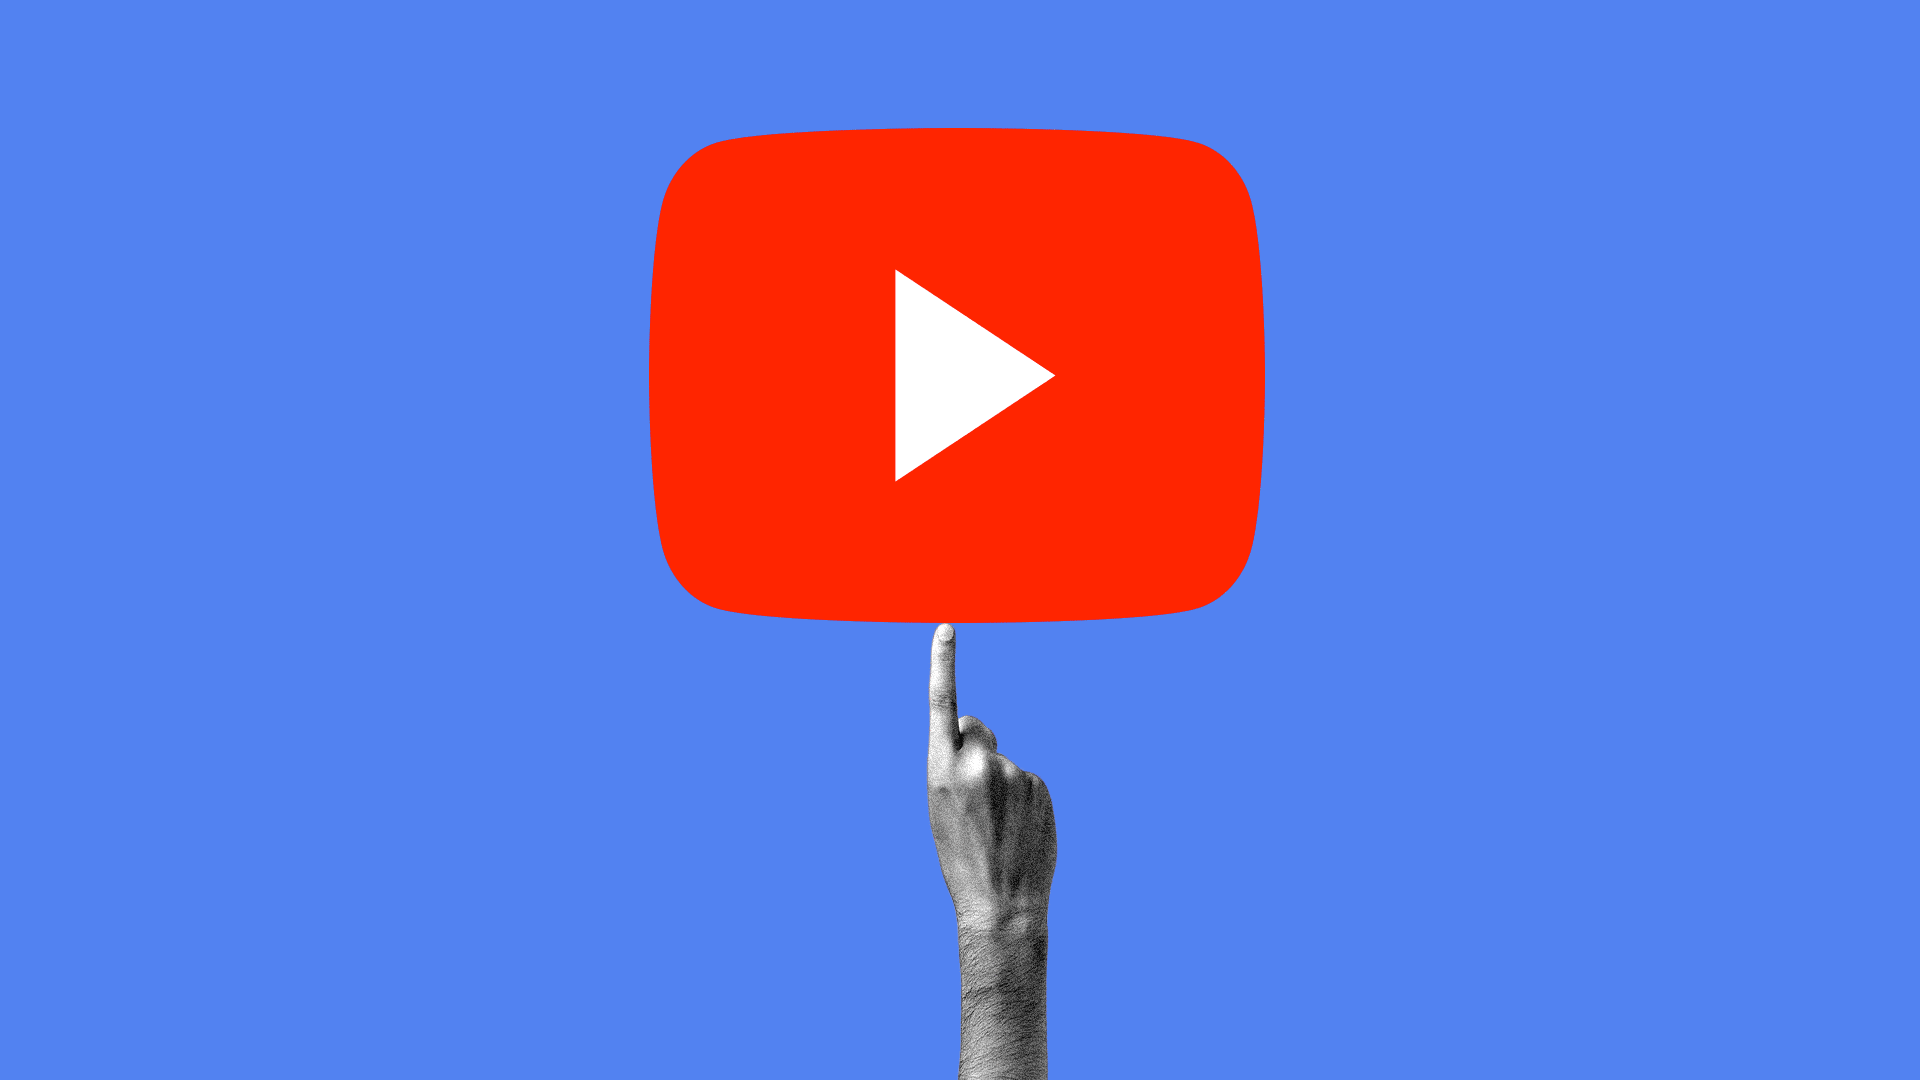 A Youtube logo spinning on a finger.